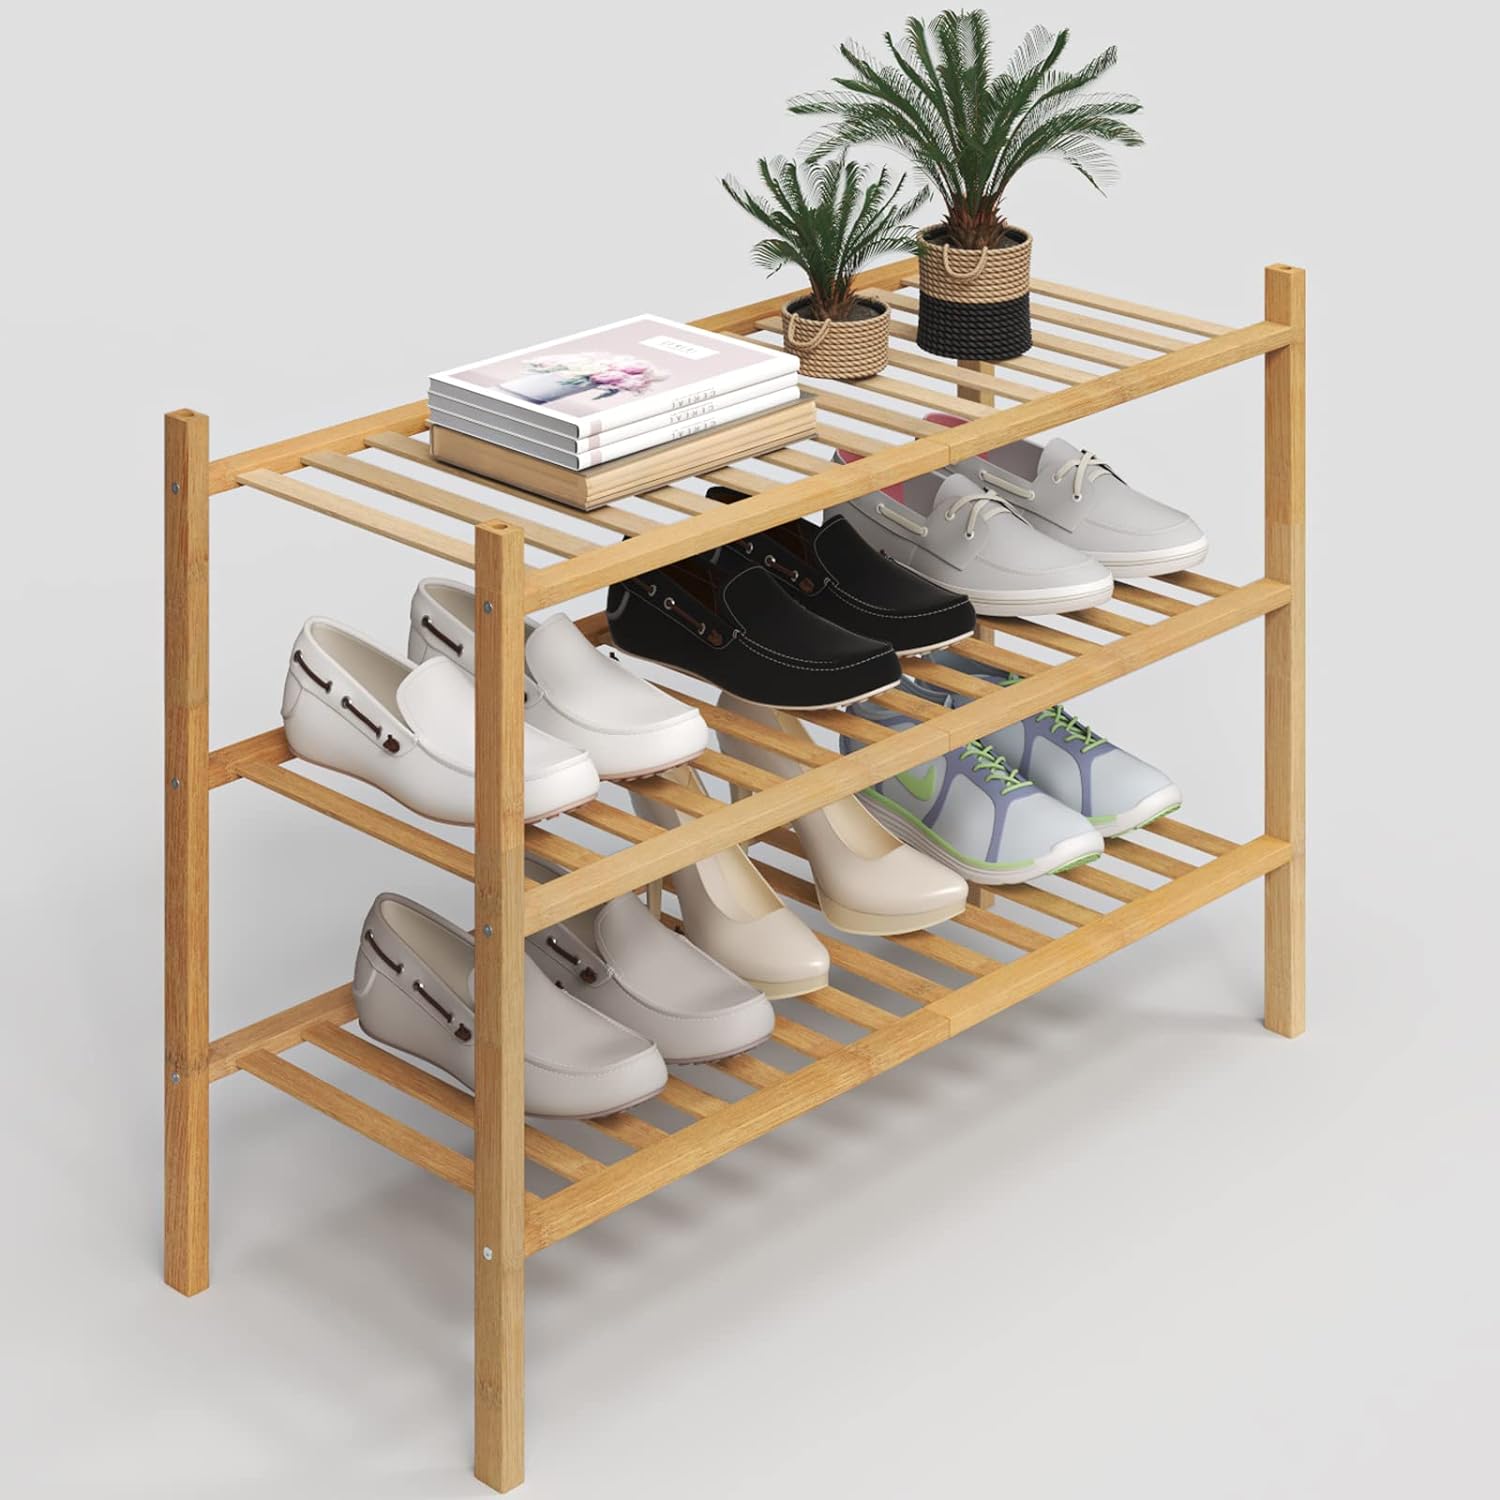 Exquisite Shoe Rack Purchasing Guide to Create a Tidy Space